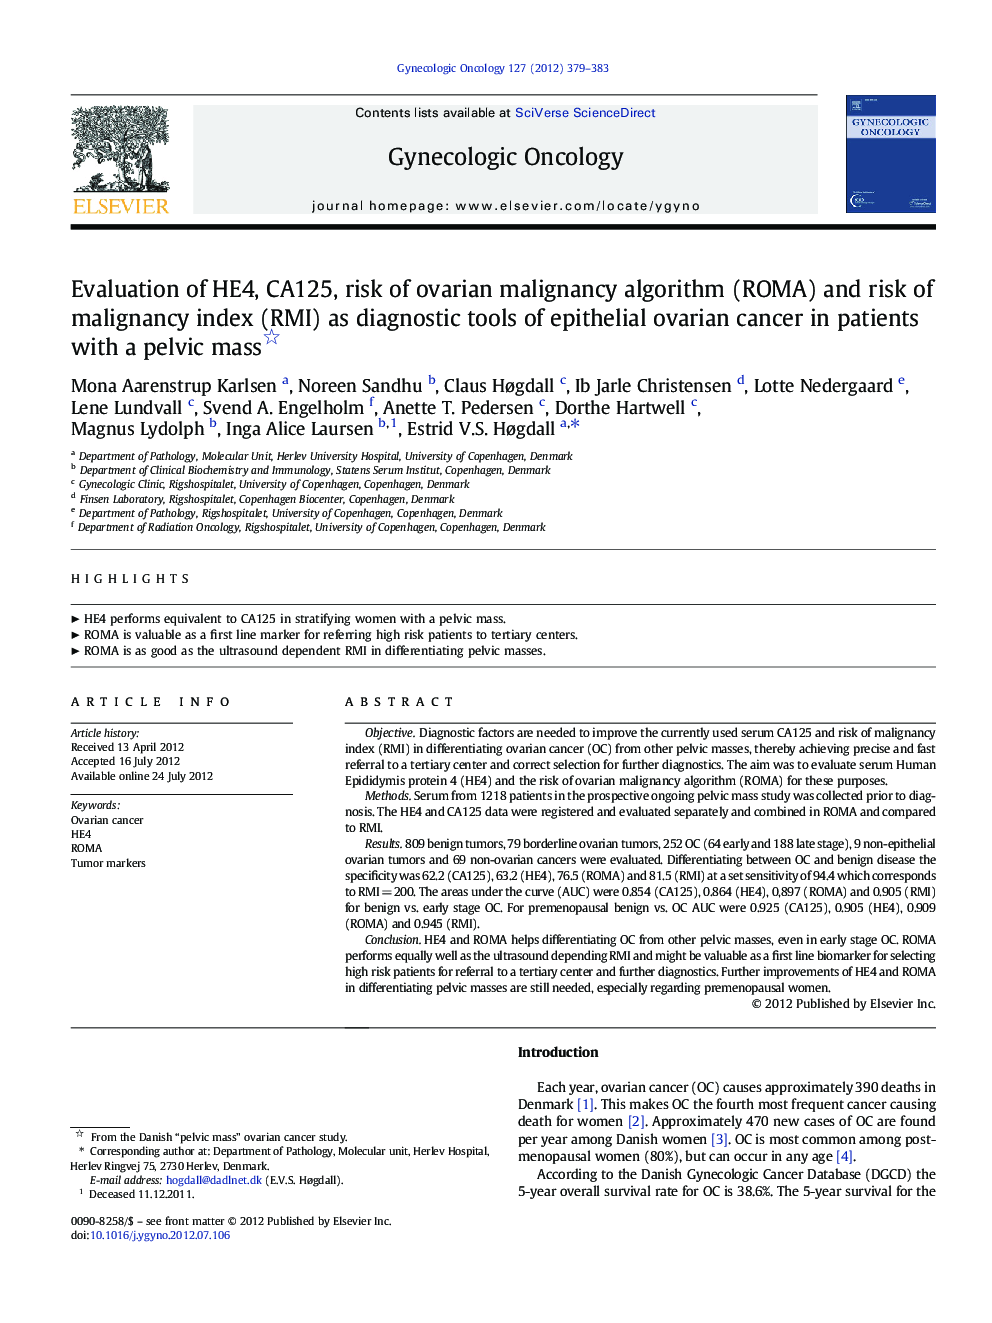 Evaluation of HE4, CA125, risk of ovarian malignancy algorithm (ROMA) and risk of malignancy index (RMI) as diagnostic tools of epithelial ovarian cancer in patients with a pelvic mass 